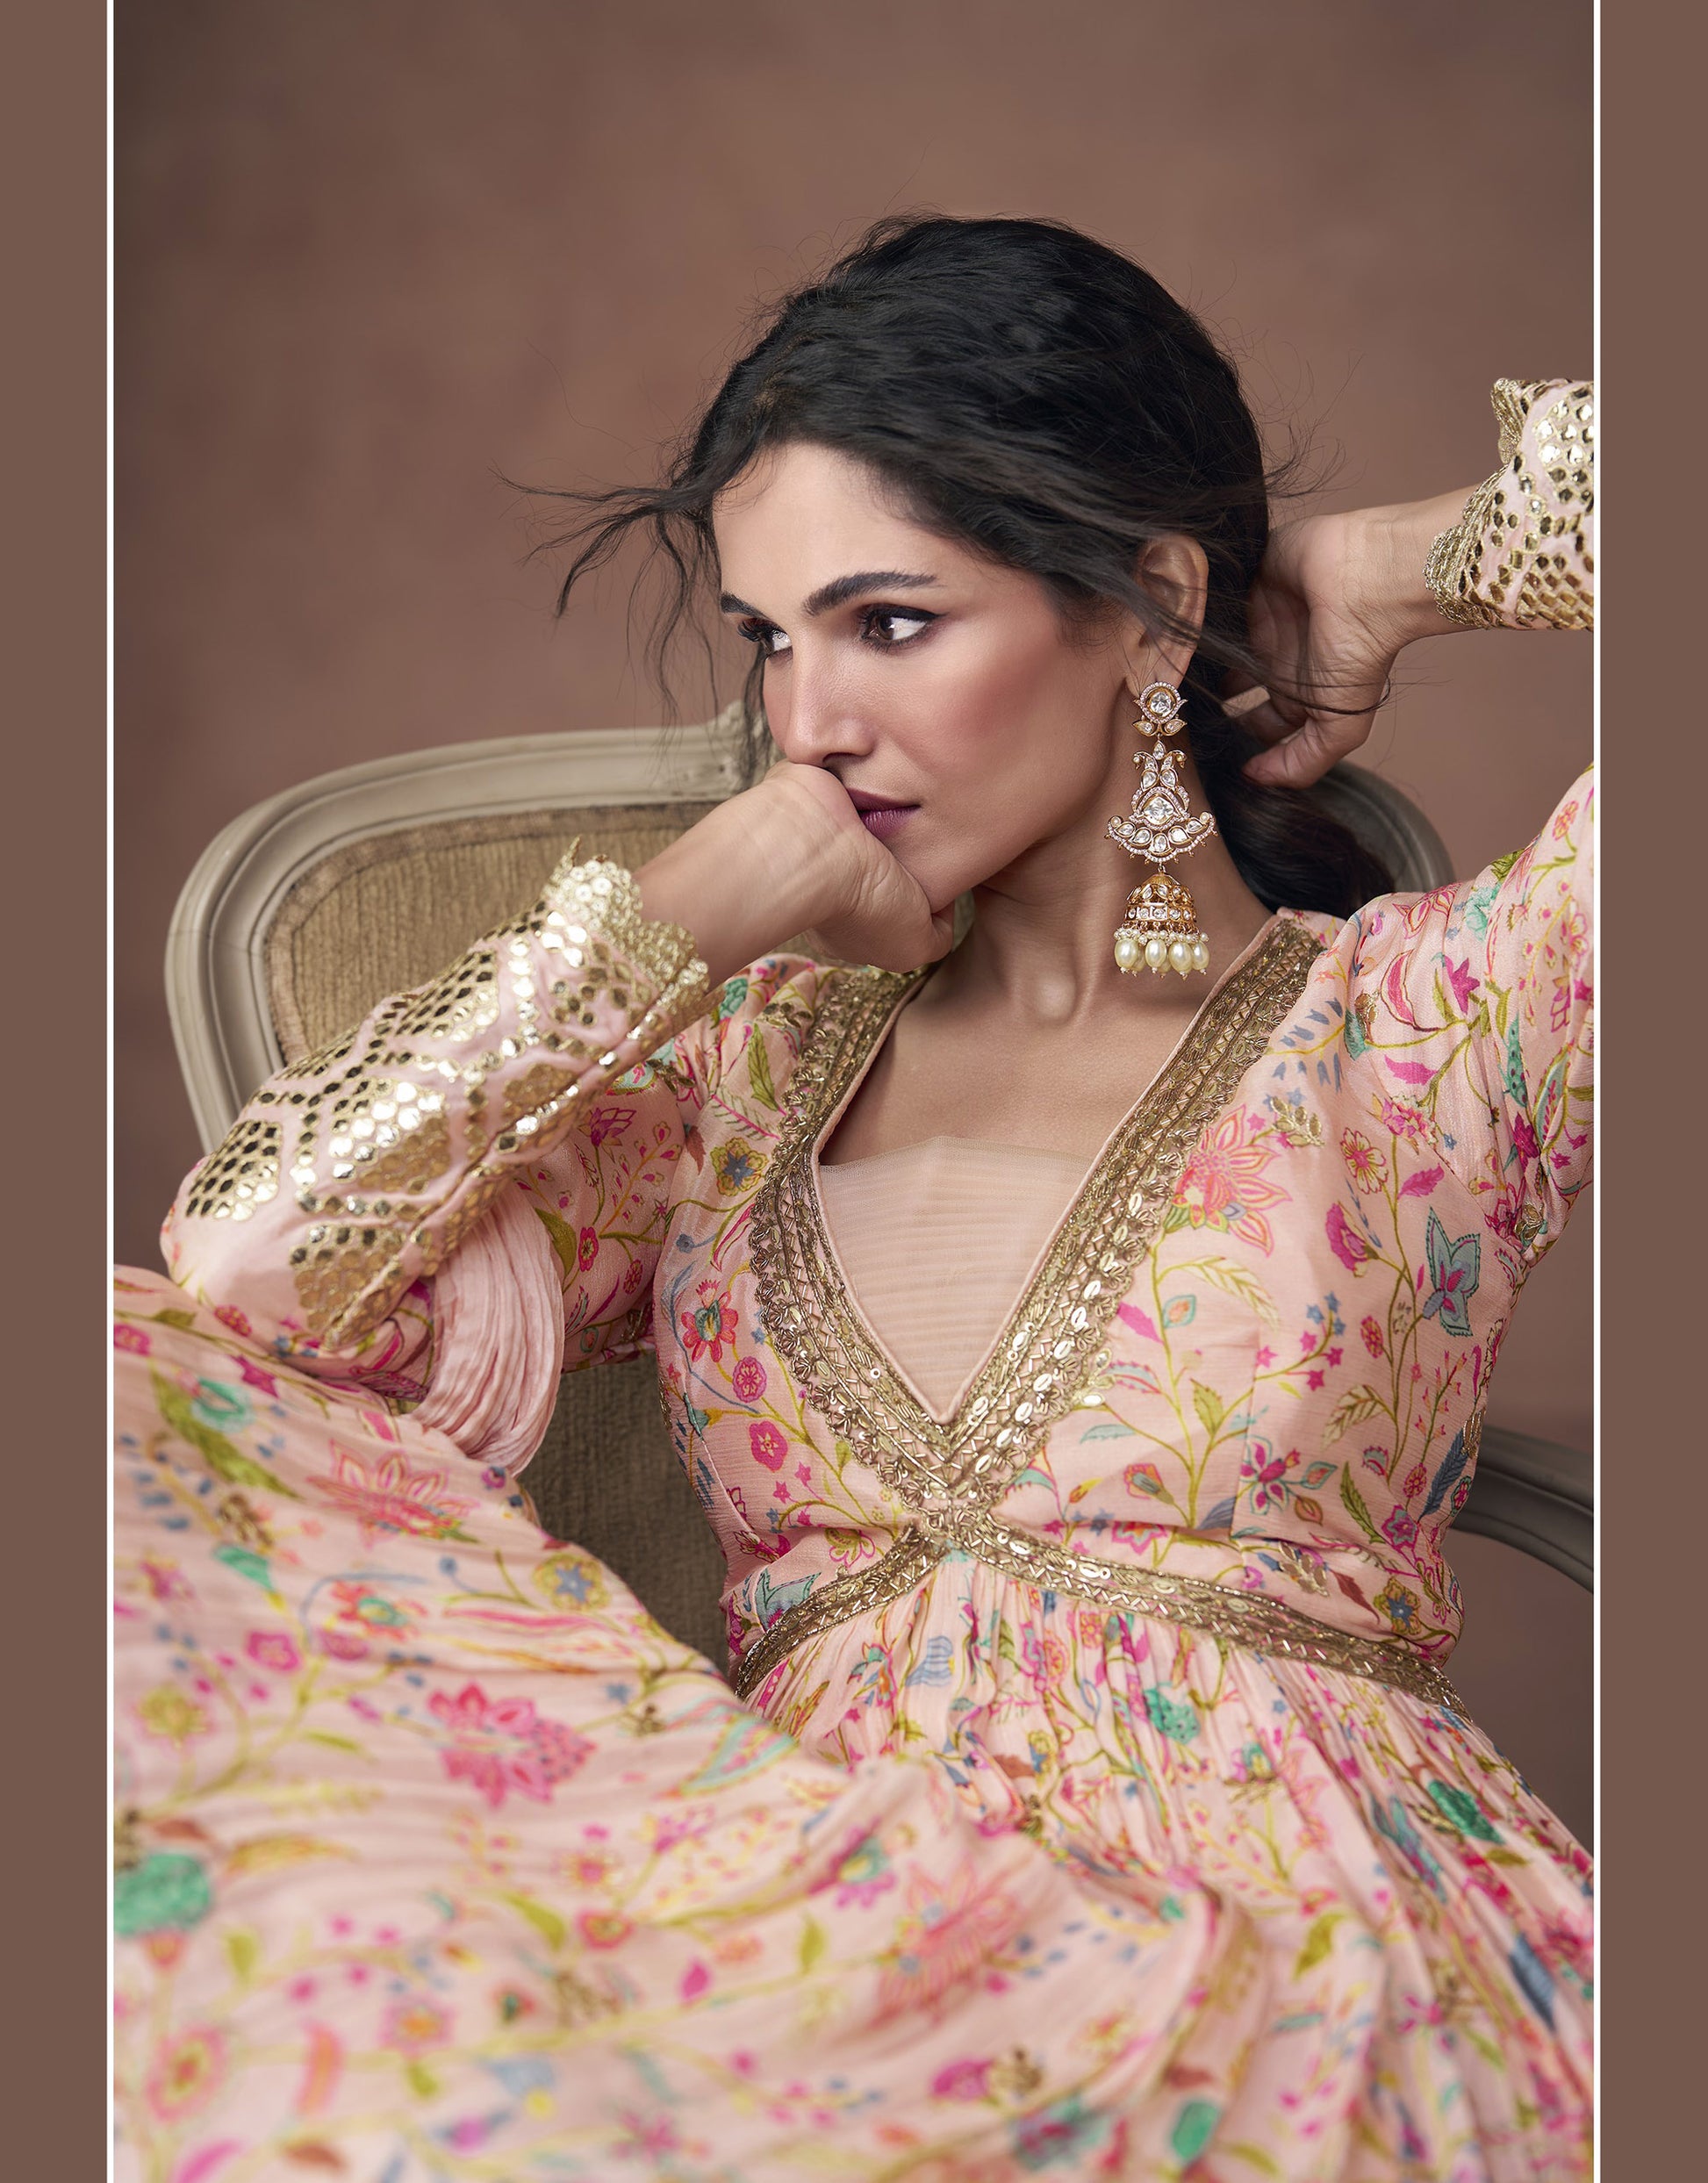 Peach Color Floral Printed Embroidery Silk Anarkali